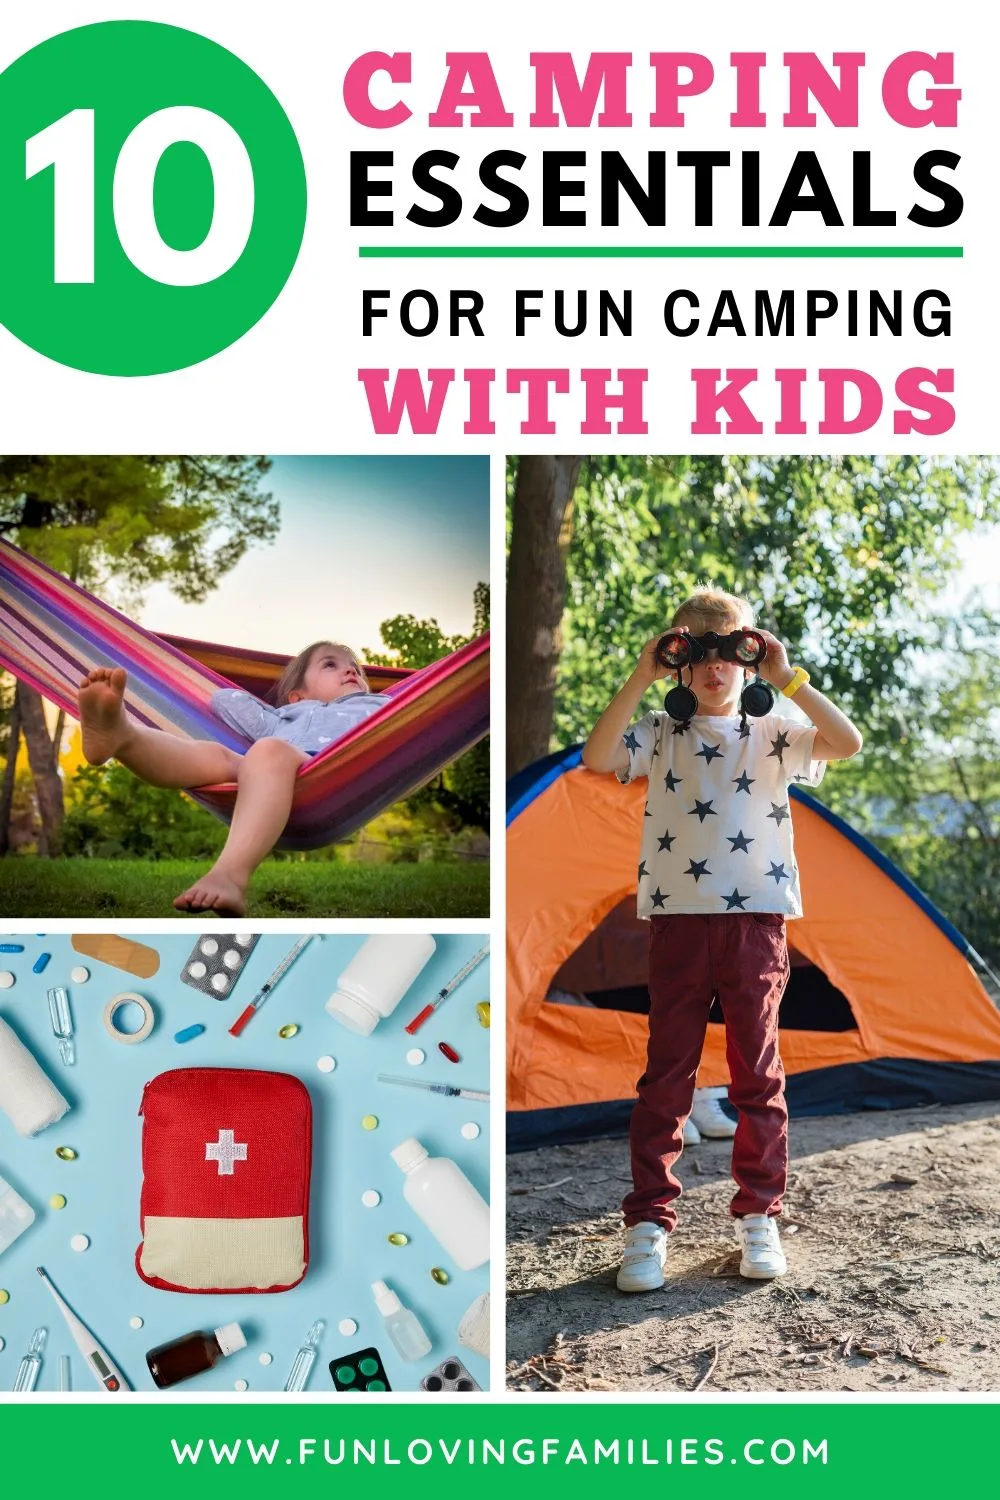 10 Family Camping Essentials: What to Bring So EVERYONE Has Fun